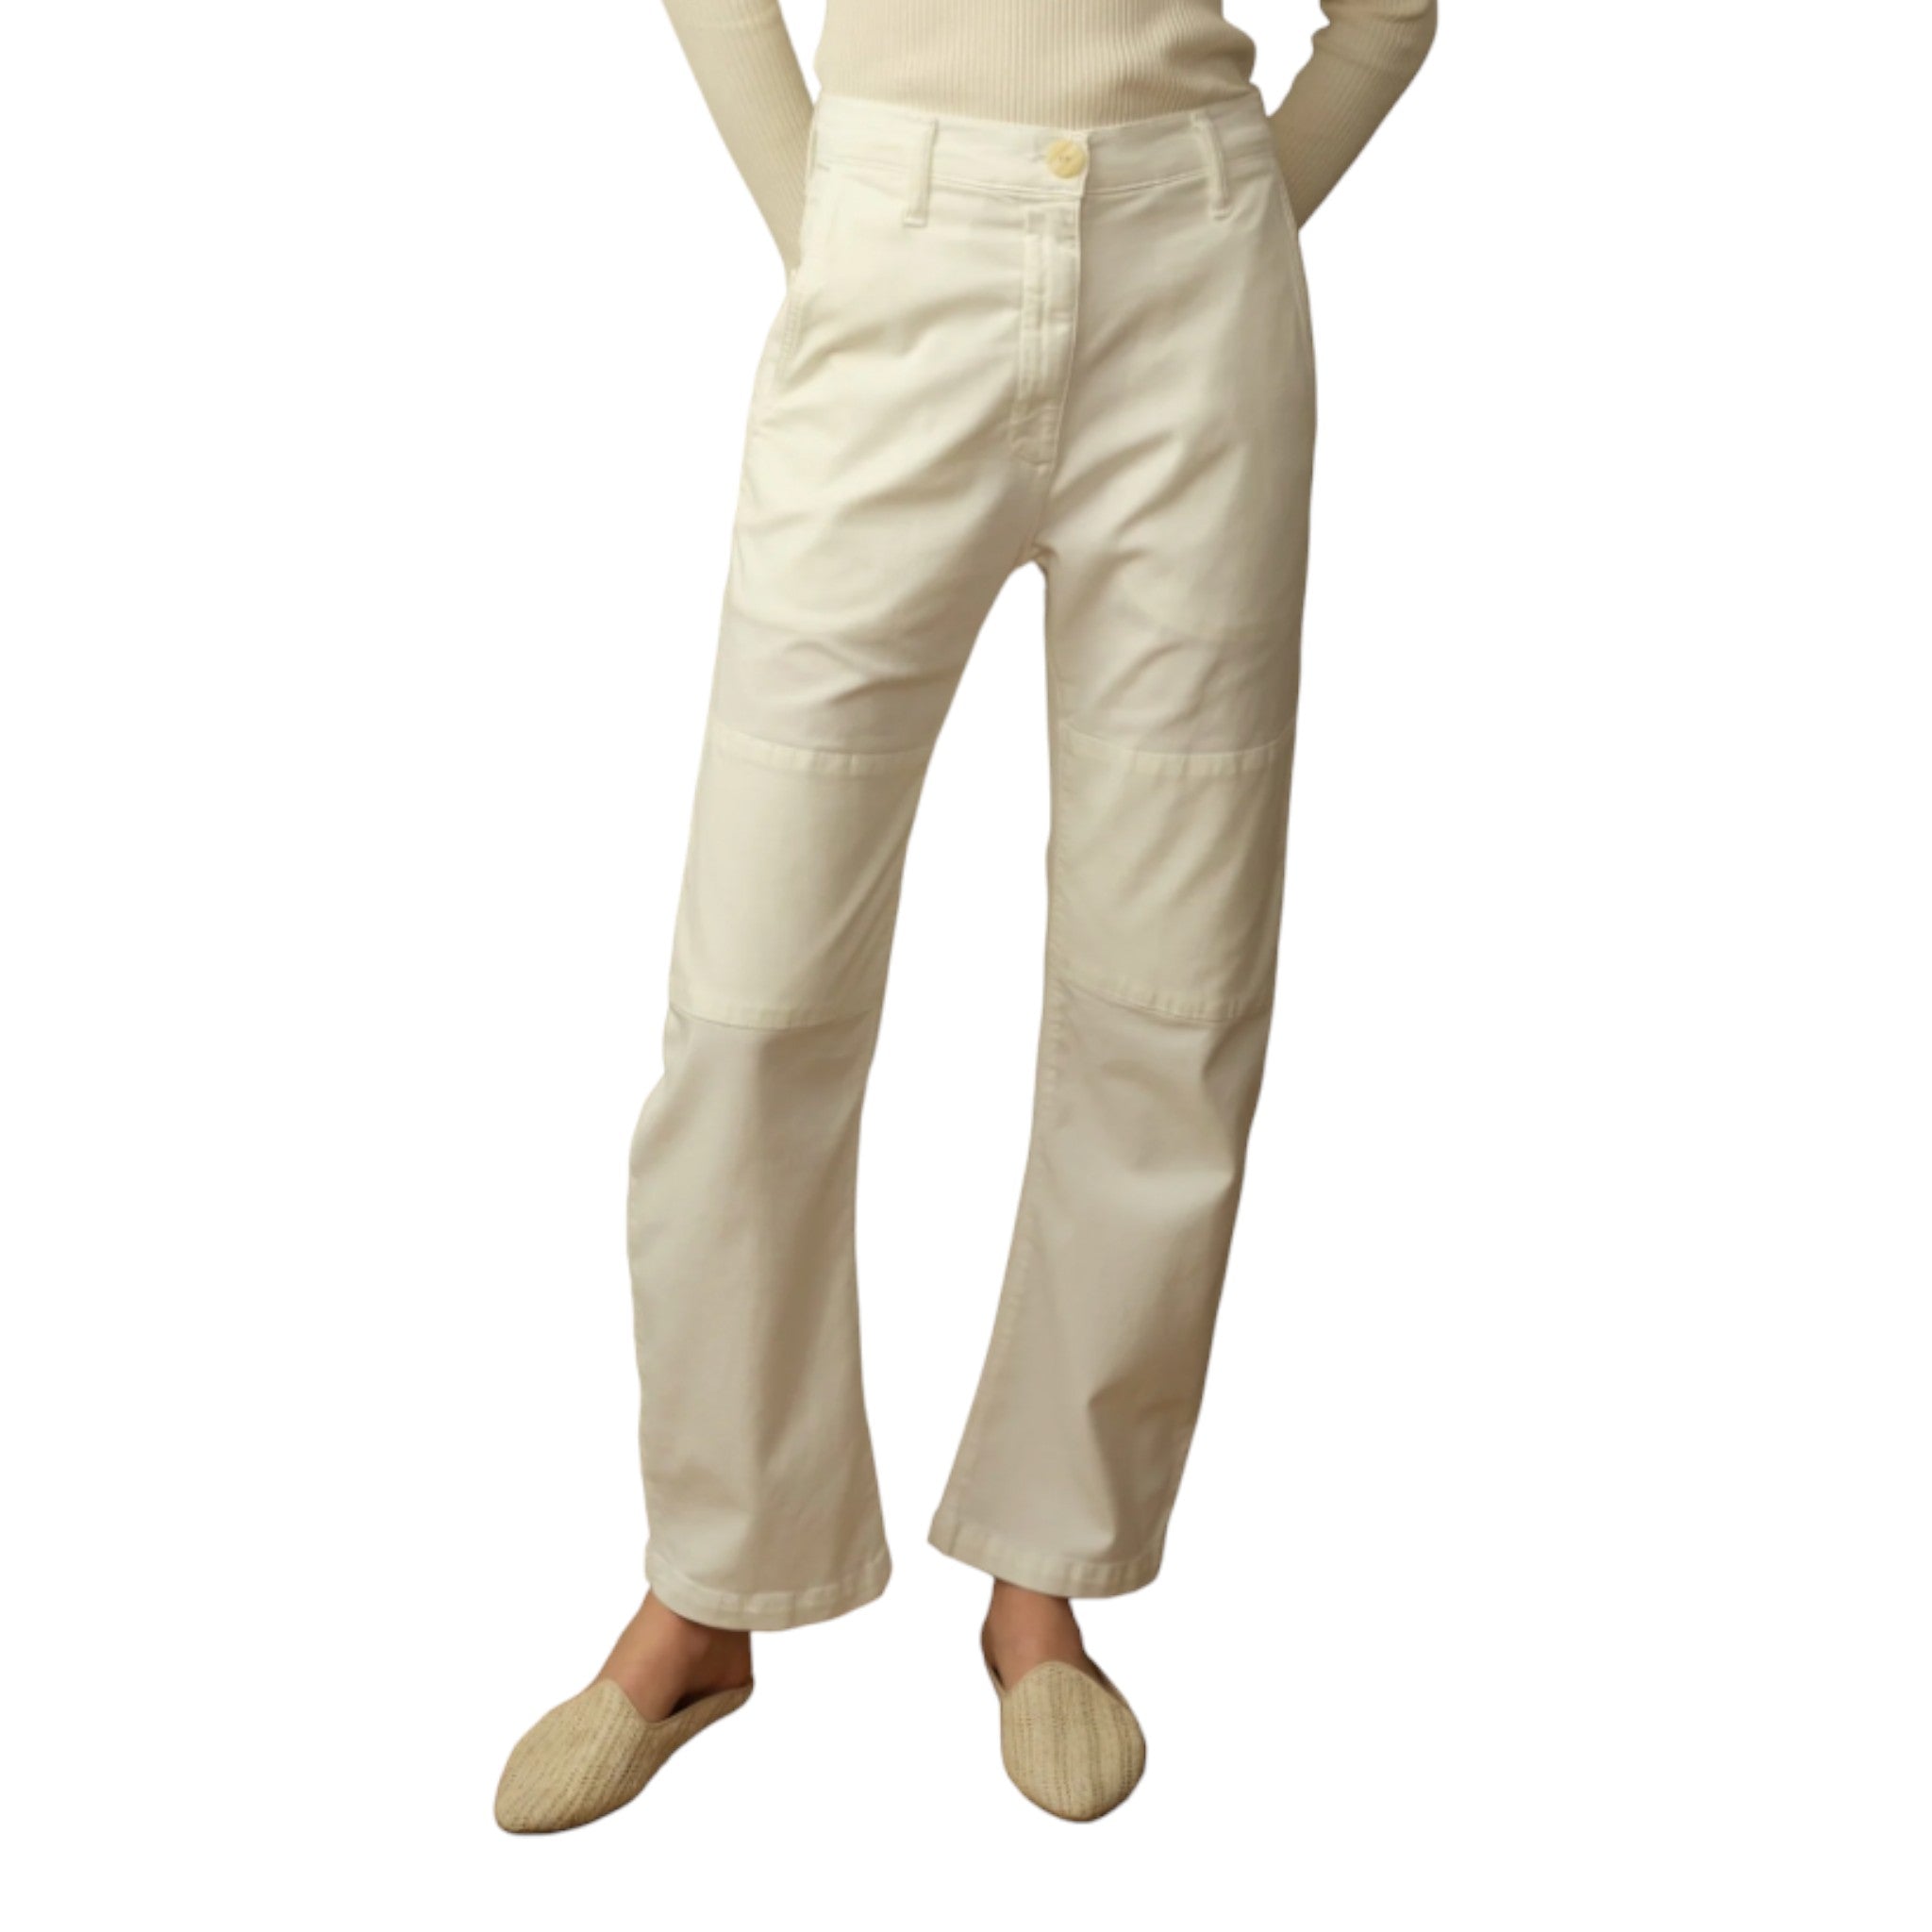 cream pant featuring a button and zip closure, belt loops, slant pockets in the front and patch pockets in the back